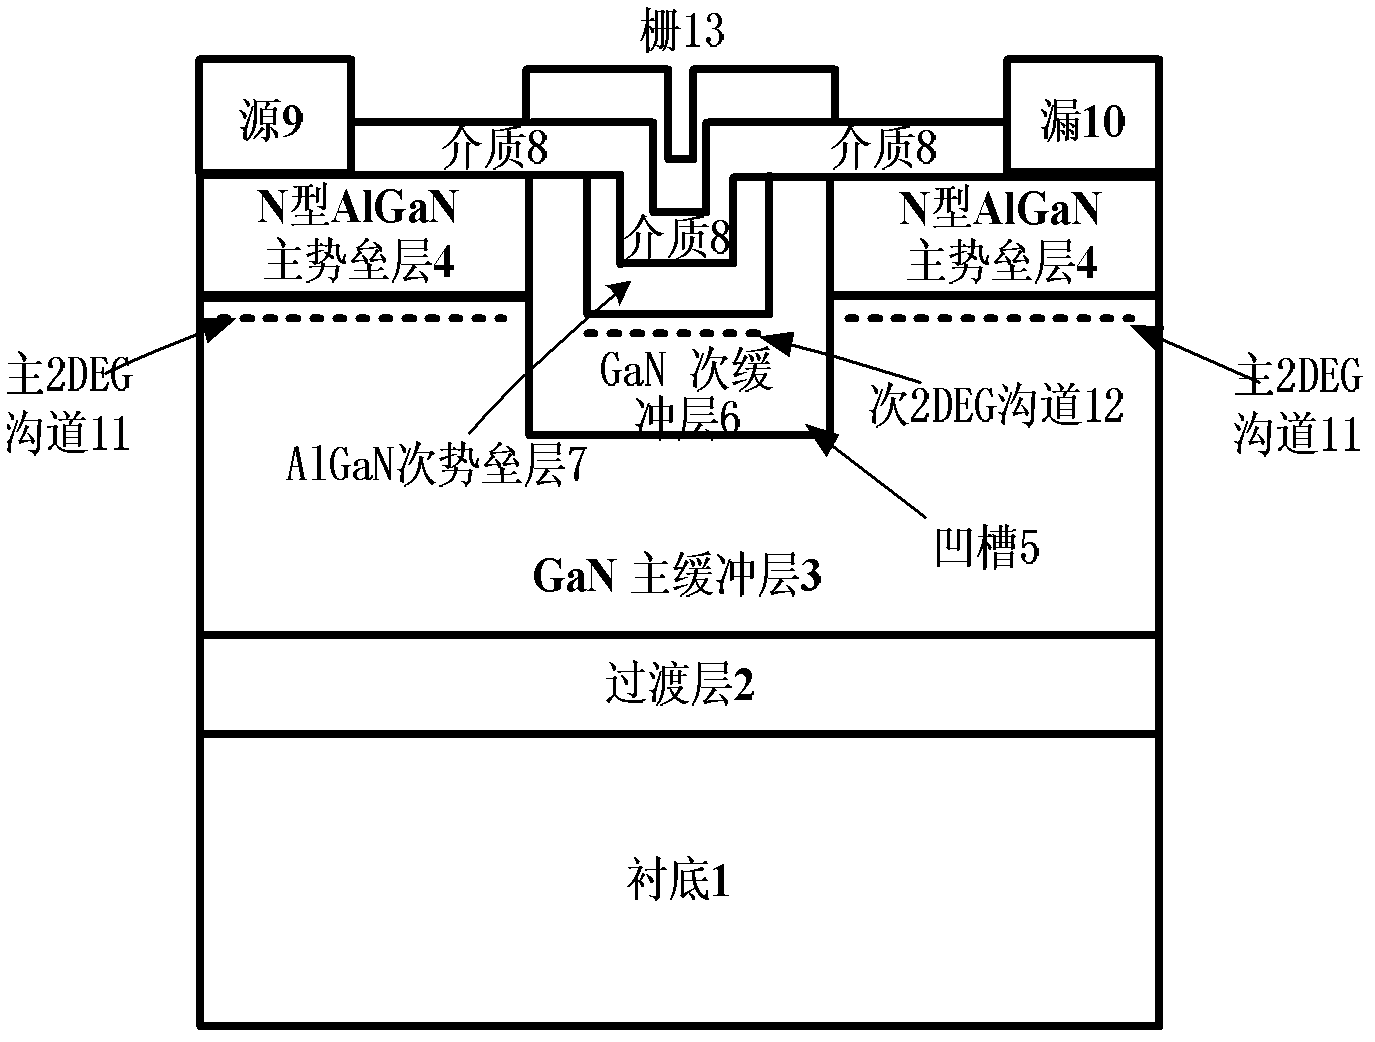 Metal insulated semi-conductor (MIS) grid GaN base enhancing high electro mobility transistor (HEMT) device and manufacture method